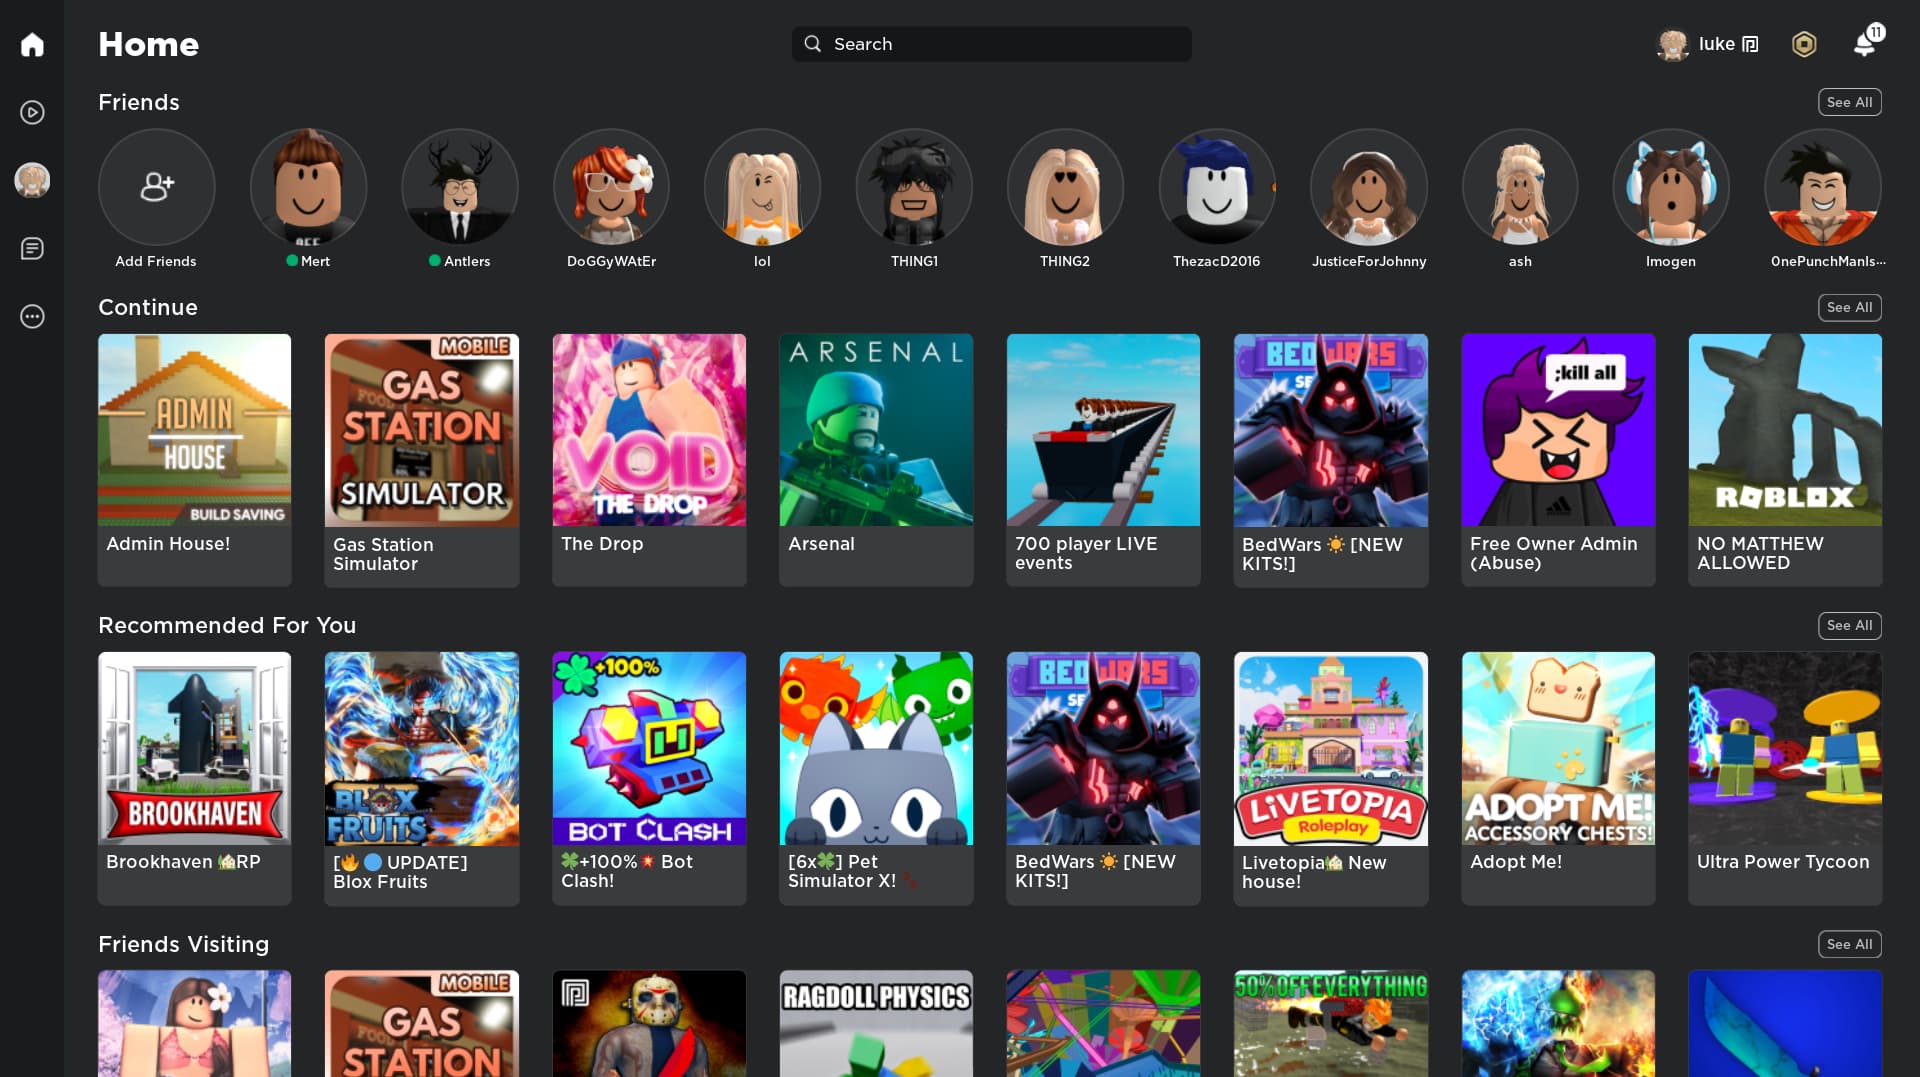 Everything players need to know about the Roblox Desktop app